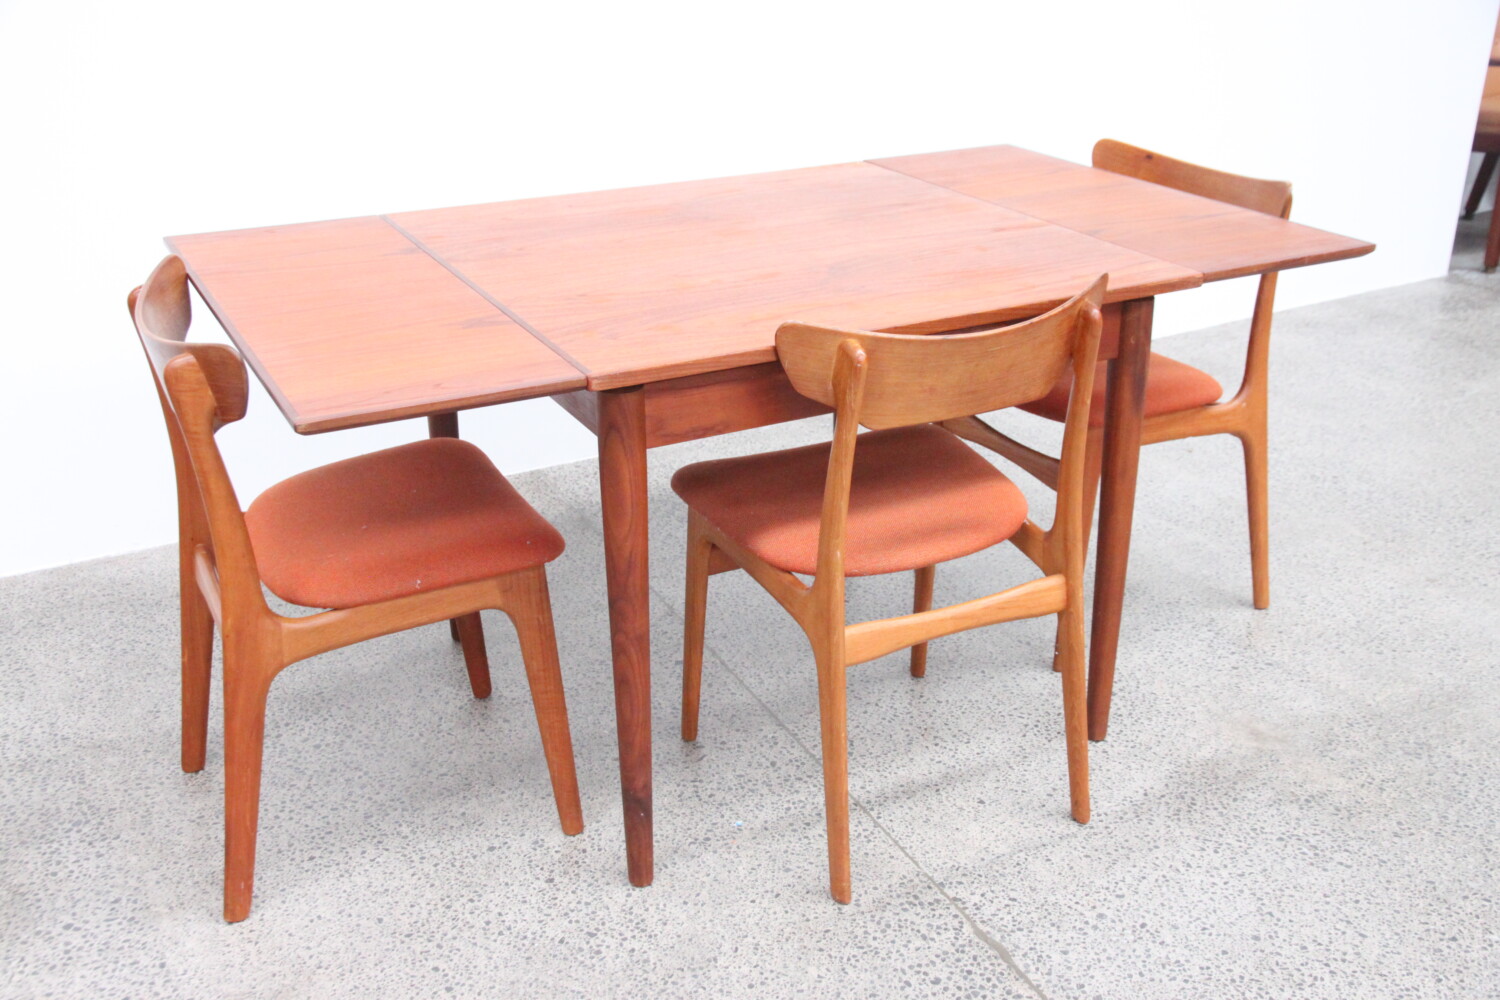 Compact Teak Table sold